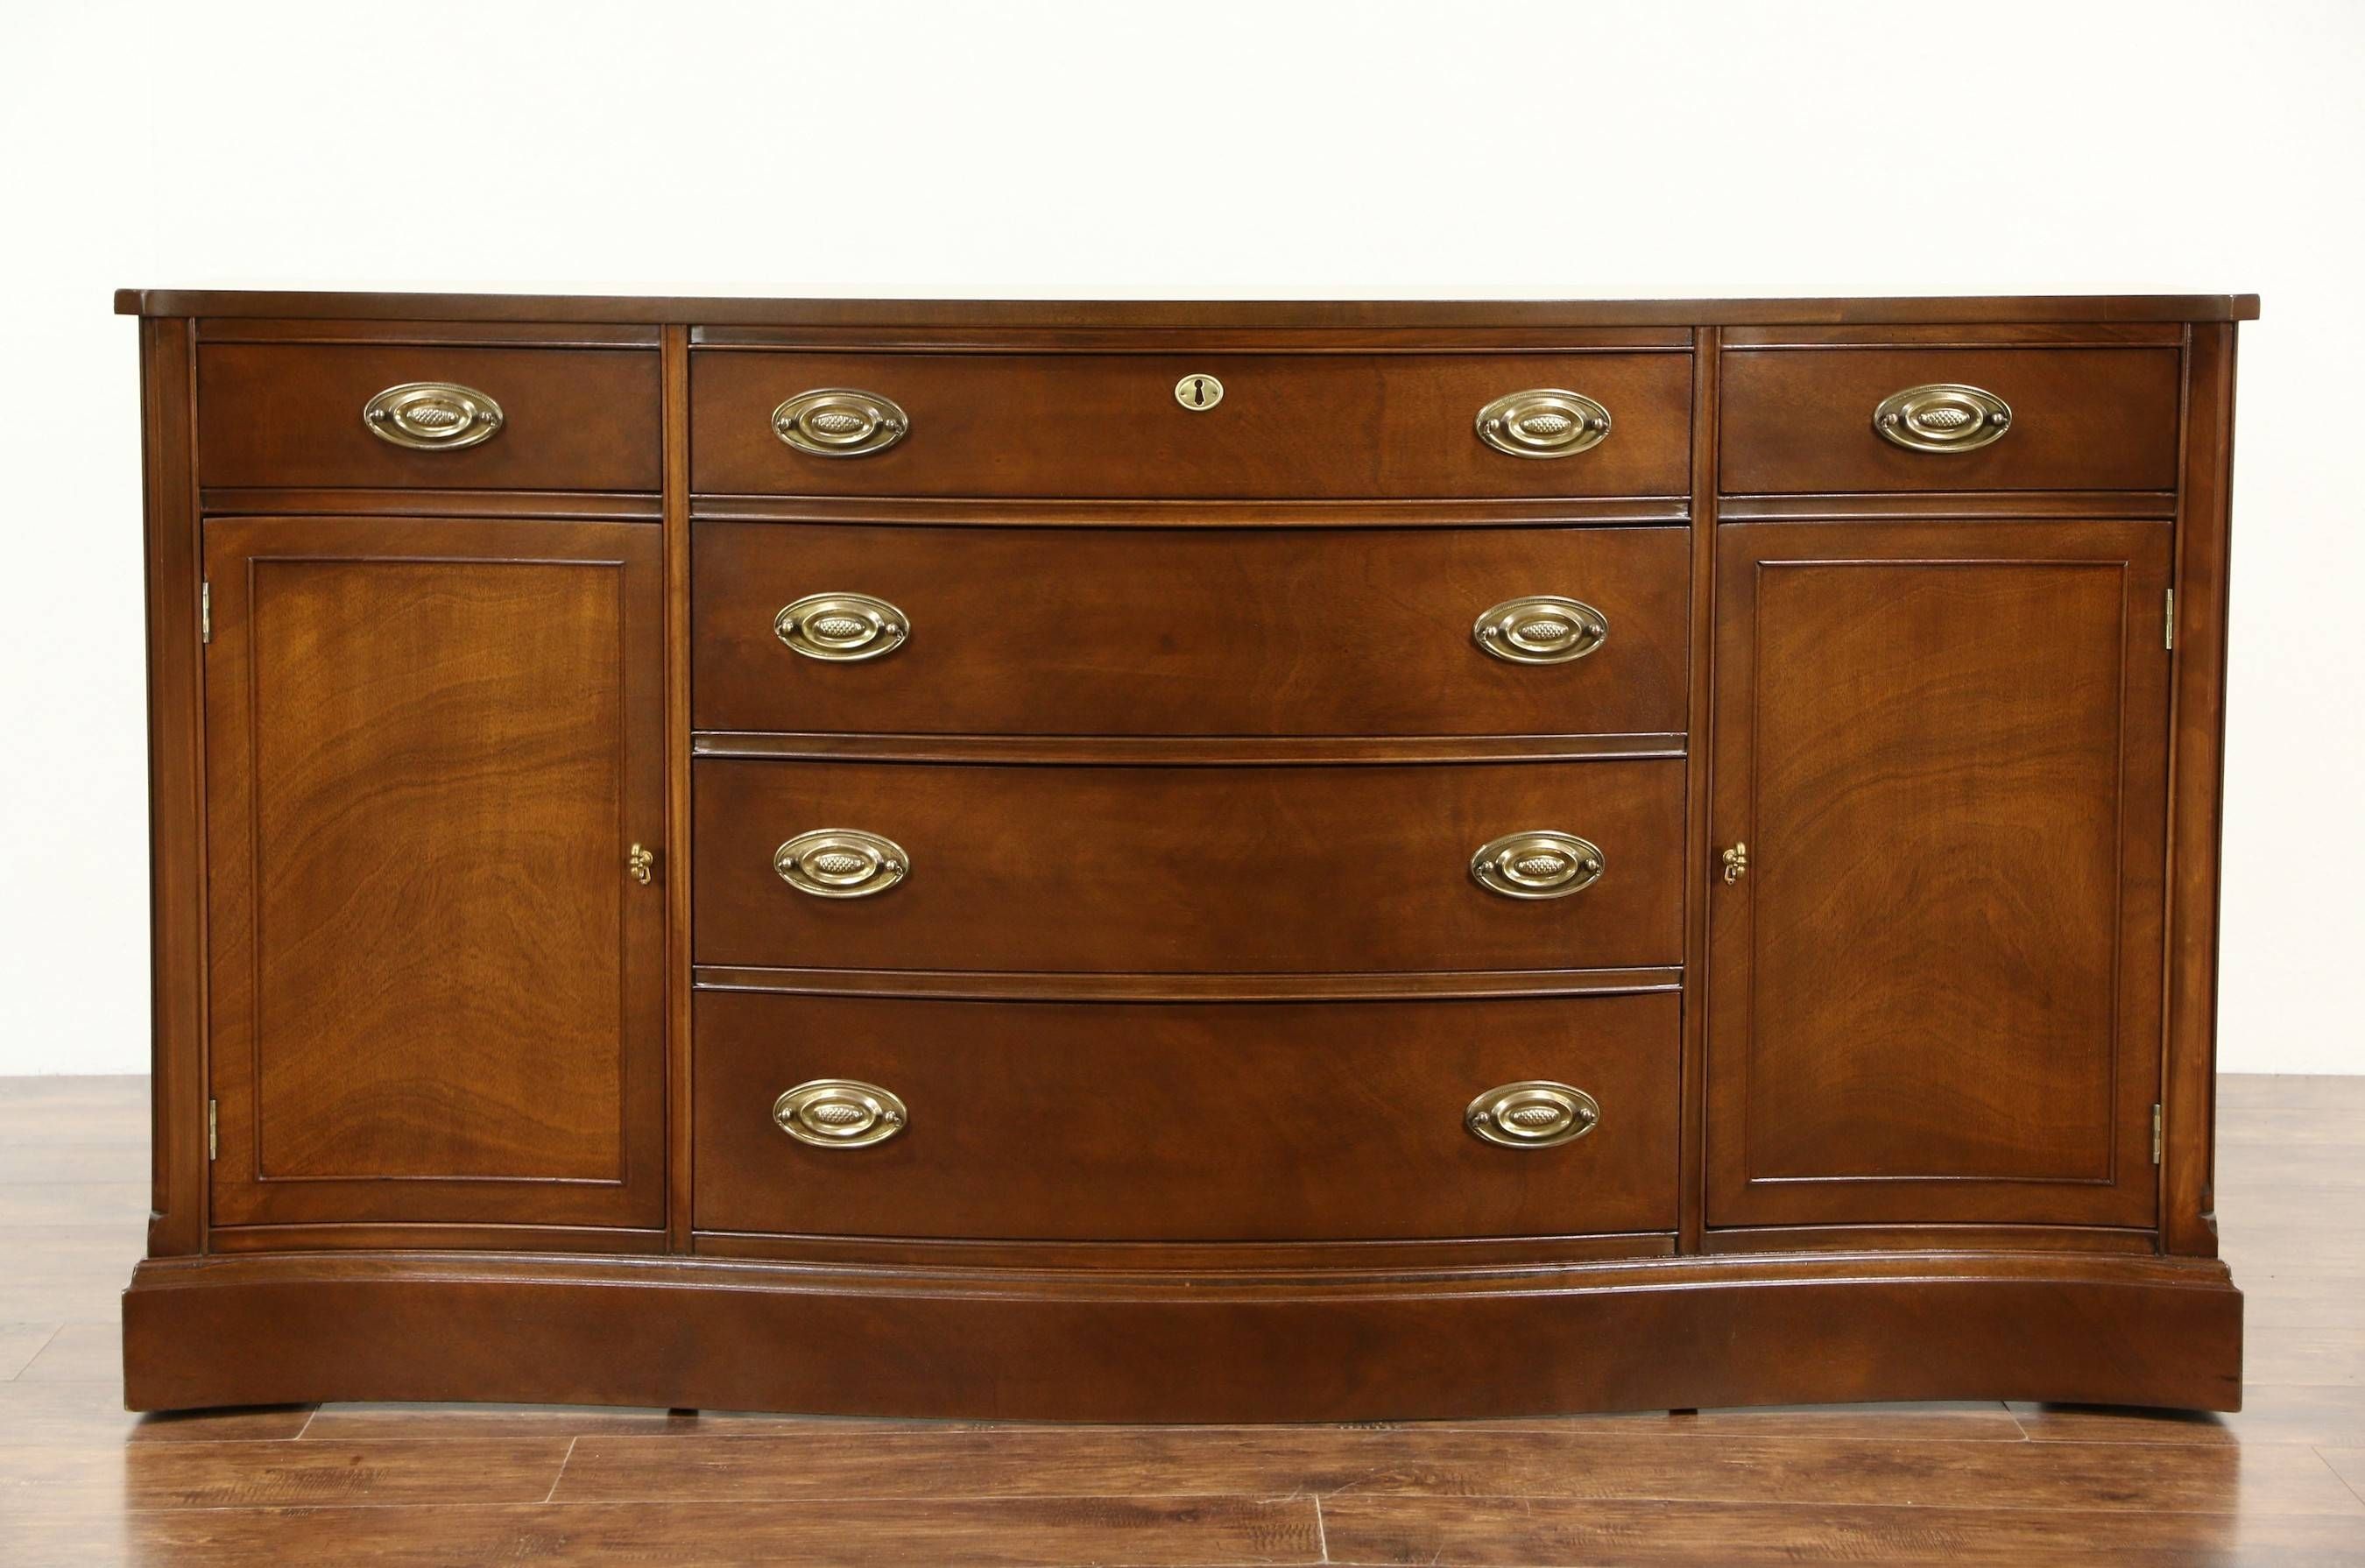 Sold – Traditional Vintage Mahogany Sideboard, Server Or Buffet Throughout Newest Mahogany Sideboards Buffets (View 15 of 15)